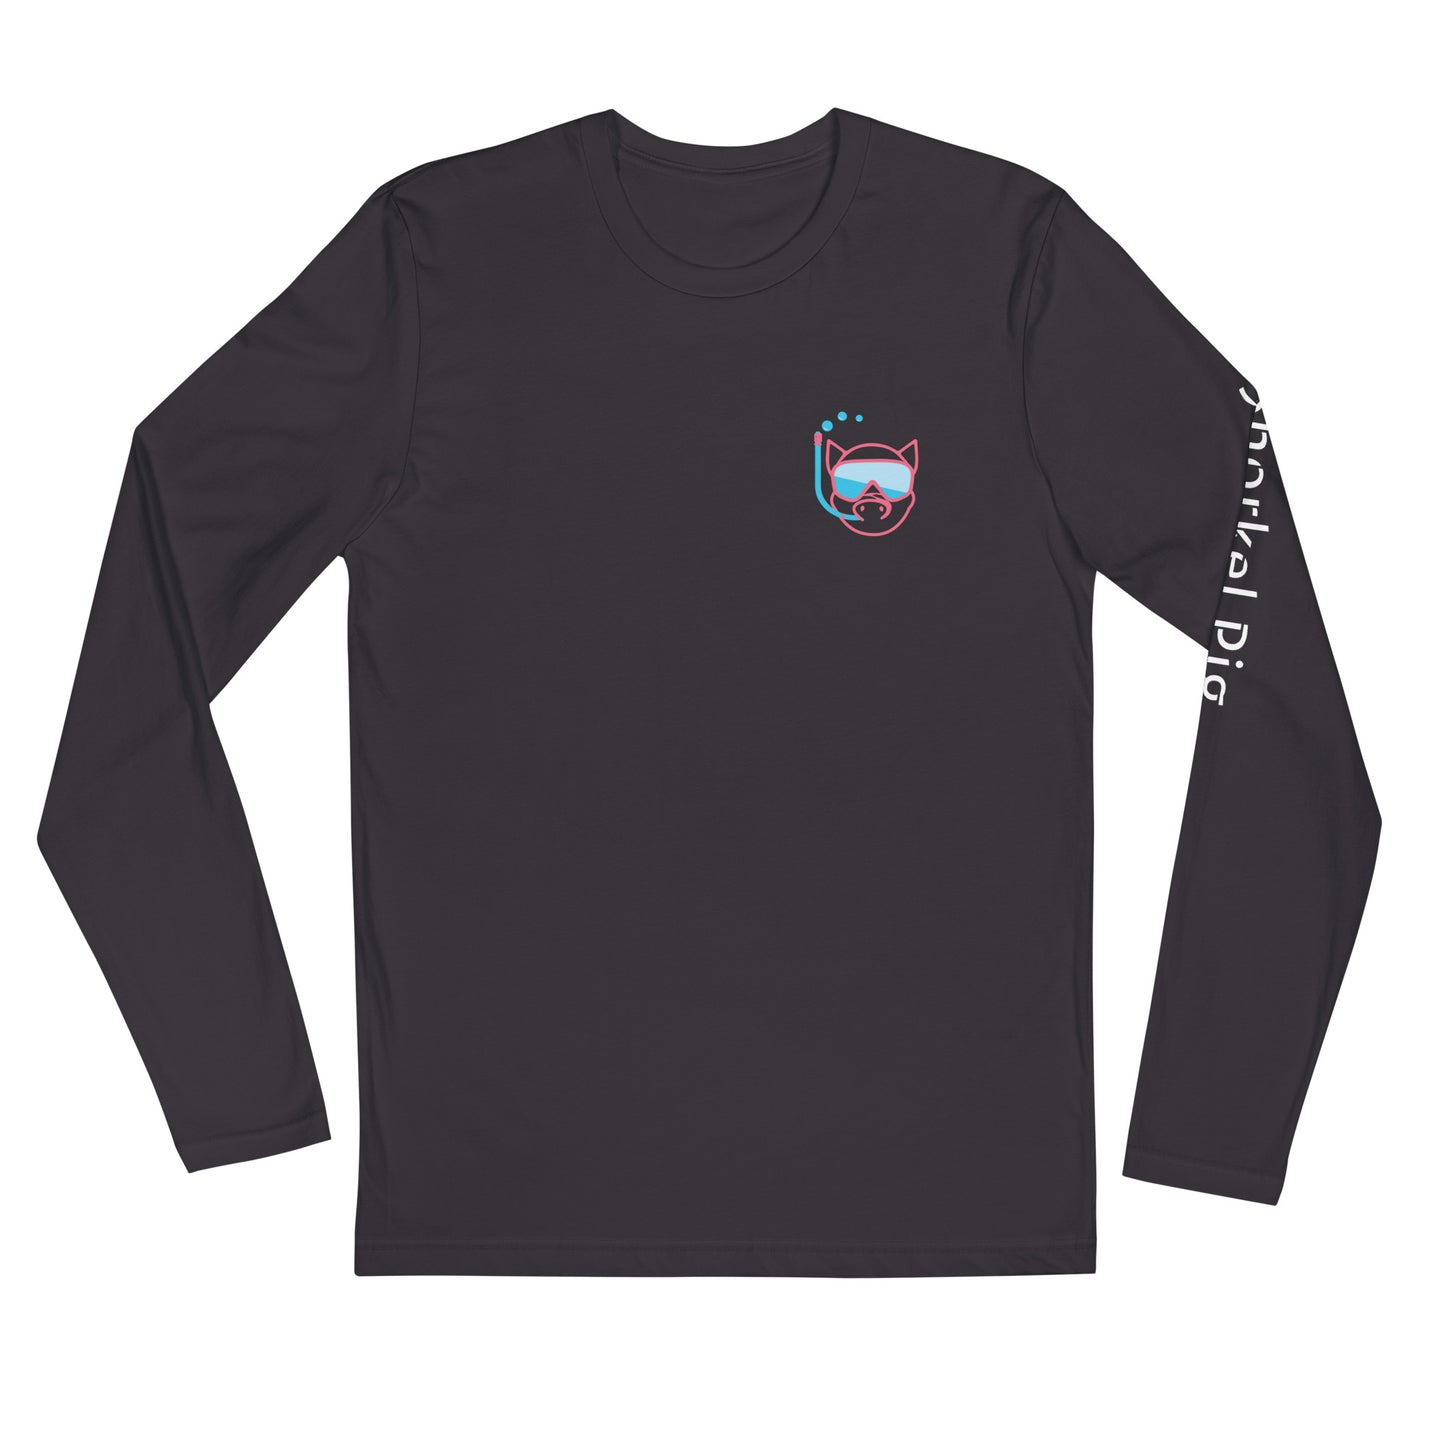 Fitted Long Sleeve